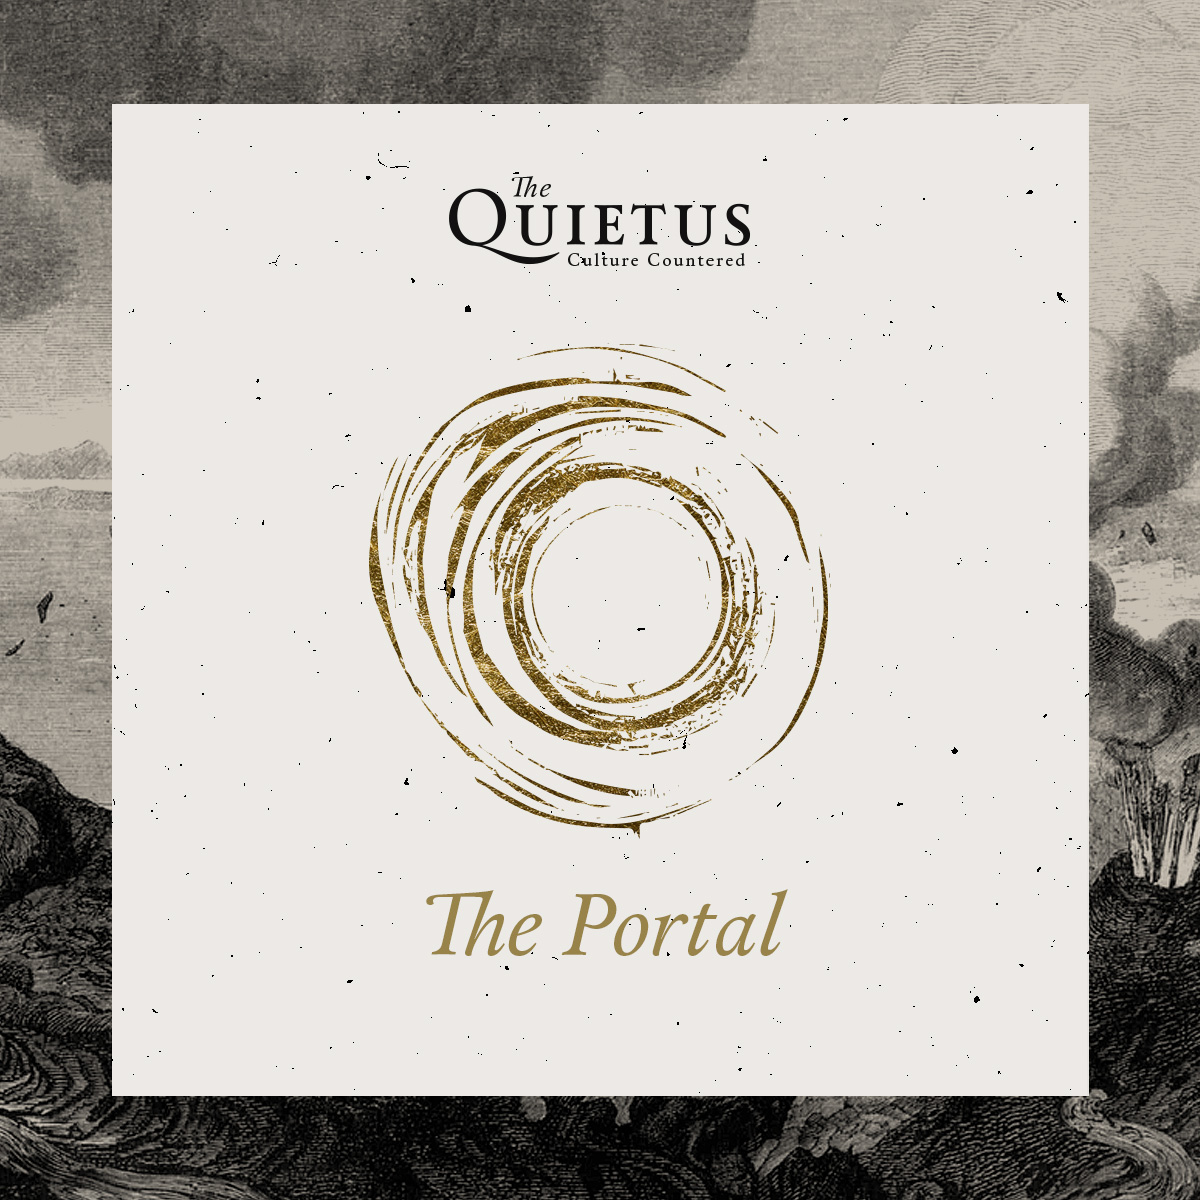 Have you discovered #ThePortal? Journey back through The Quietus archives with us each week to discover some treasured interviews, Baker’s Dozens, reviews and more. This week's Portal theme: Survival & Rebirth: thequietus.com/portal/